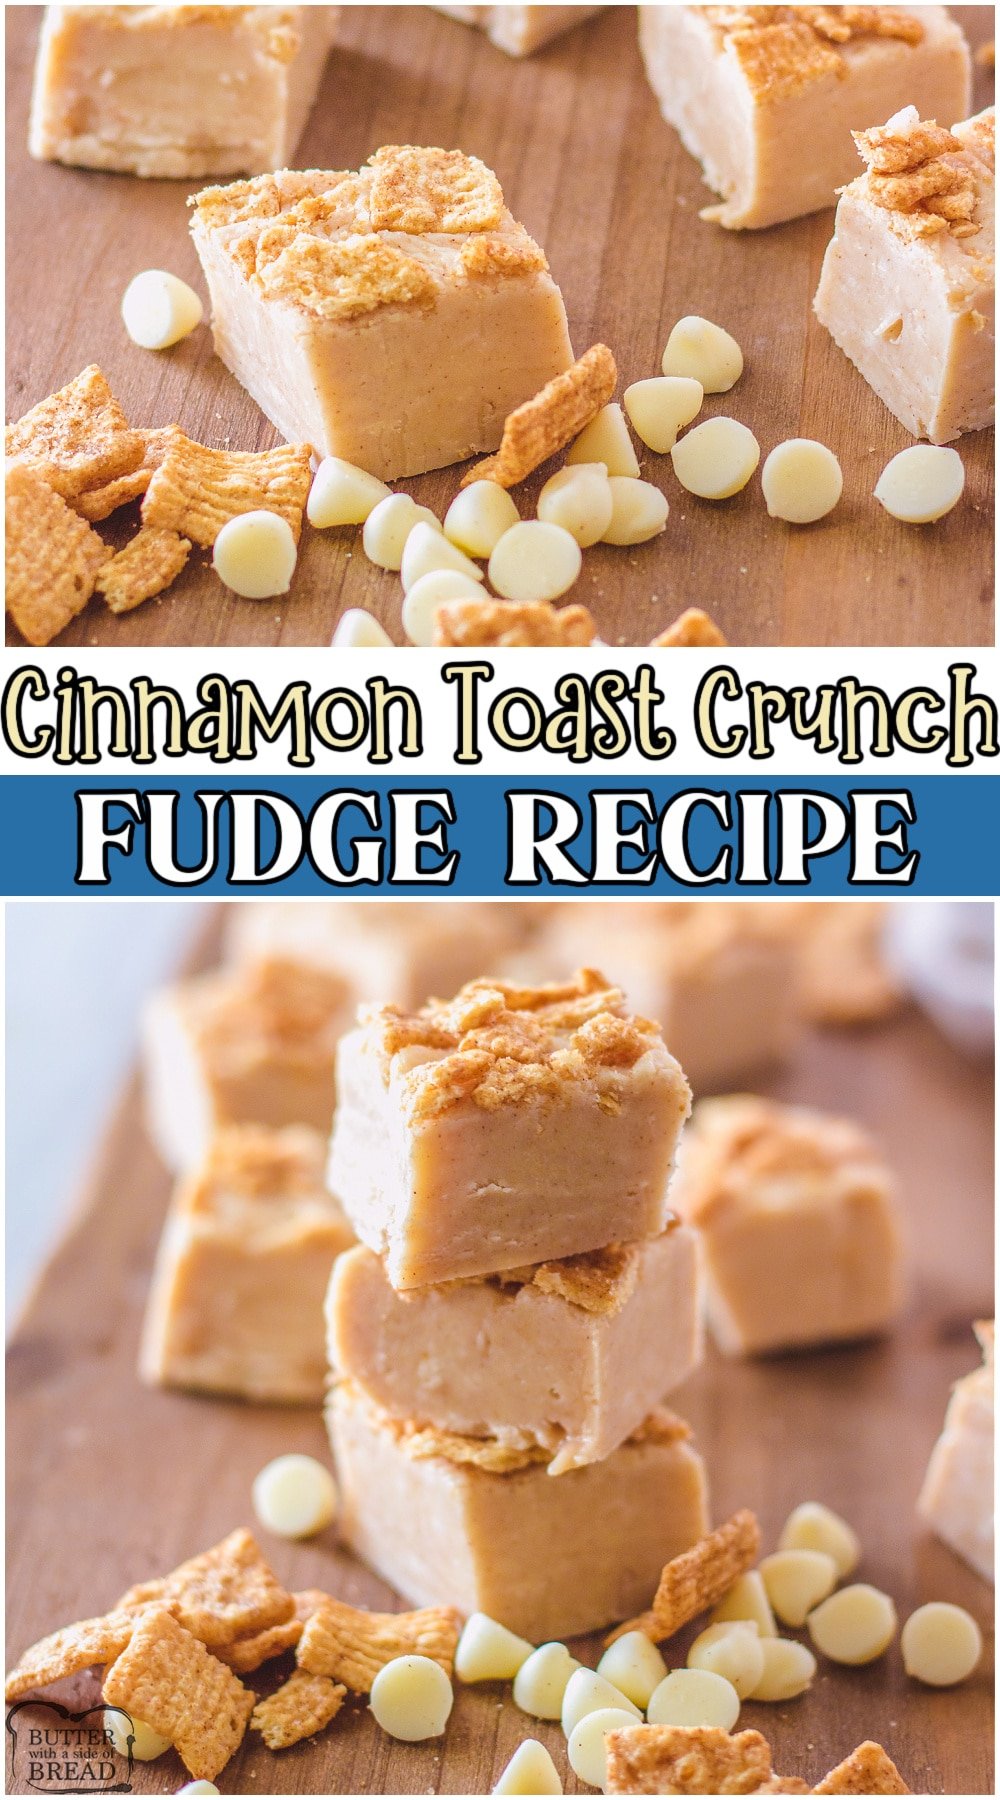 Cinnamon toast crunch fudge made easy with white chocolate, sweetened condensed milk & Cinnamon toast Crunch cereal! Fun & tasty cinnamon fudge with crunchy cereal topping that everyone loves! #fudge #cinnamon #whitechocolate #cereal #candy #dessert #easyrecipe from BUTTER WITH A SIDE OF BREAD